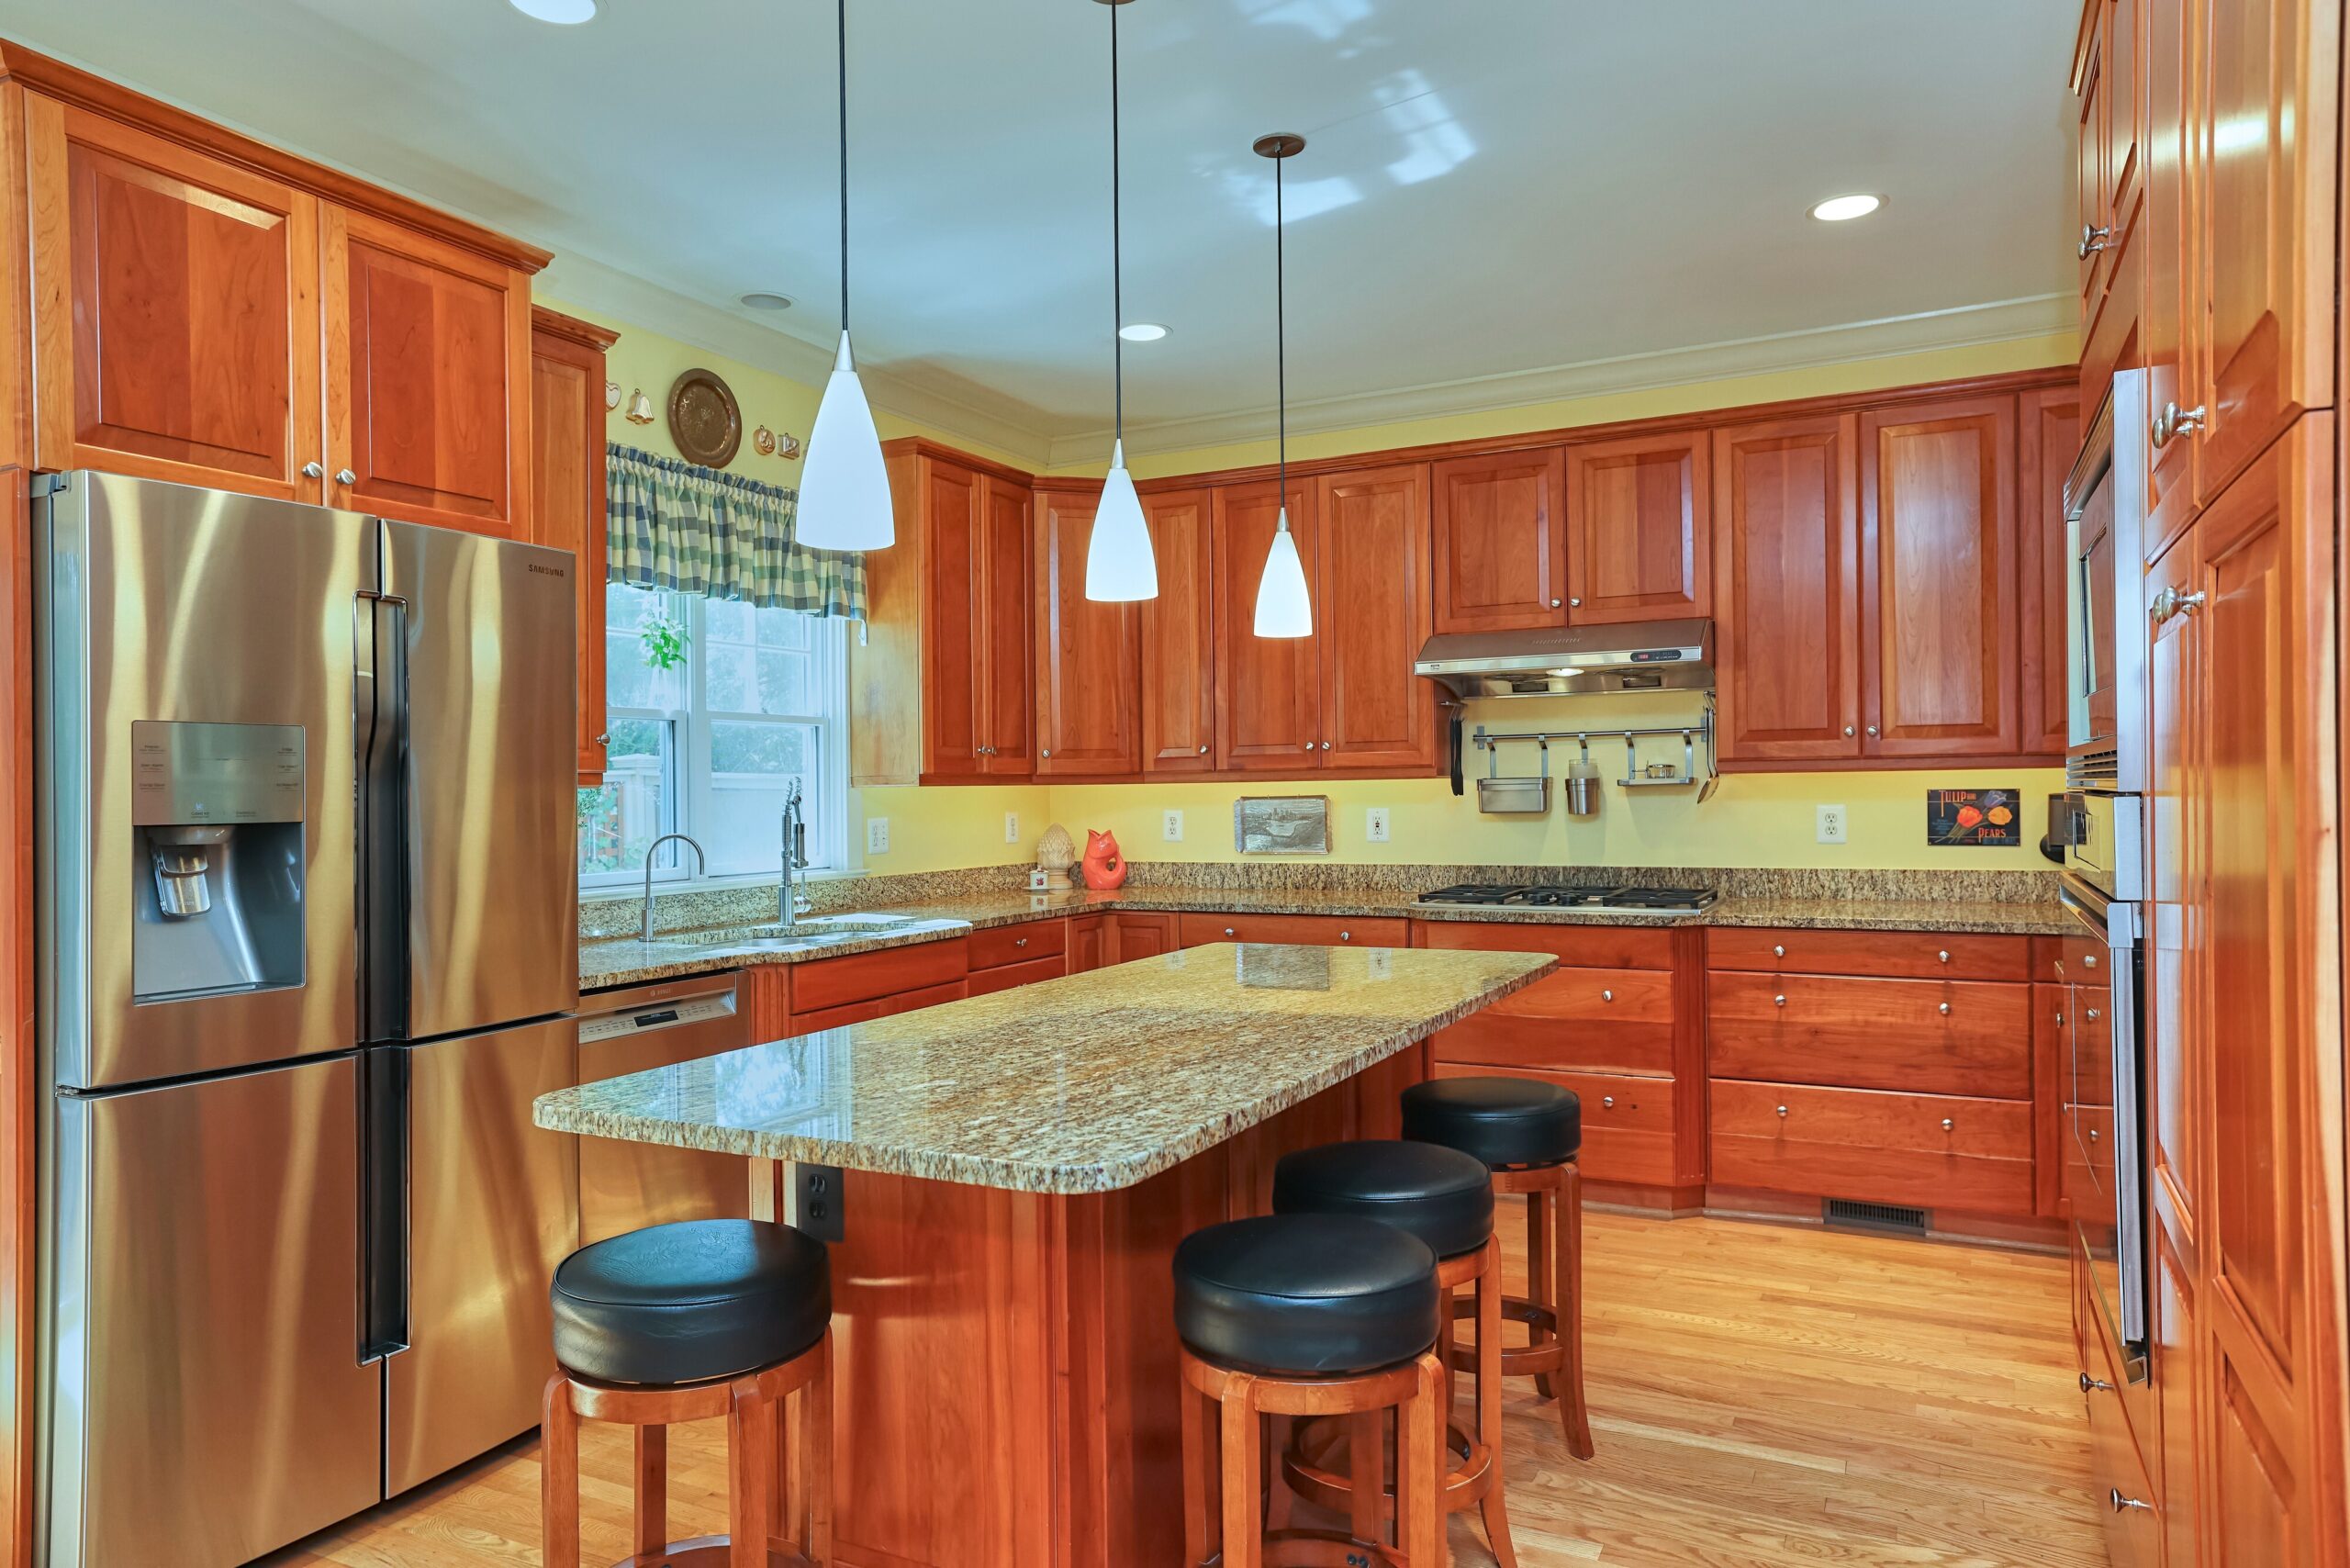 Professional interior photo of 819 N Fillmore St - Showing the kitchen with cherry cabinets, granite counters, hardwood floors, stainless appliances and a large island which can seat 4-5 people